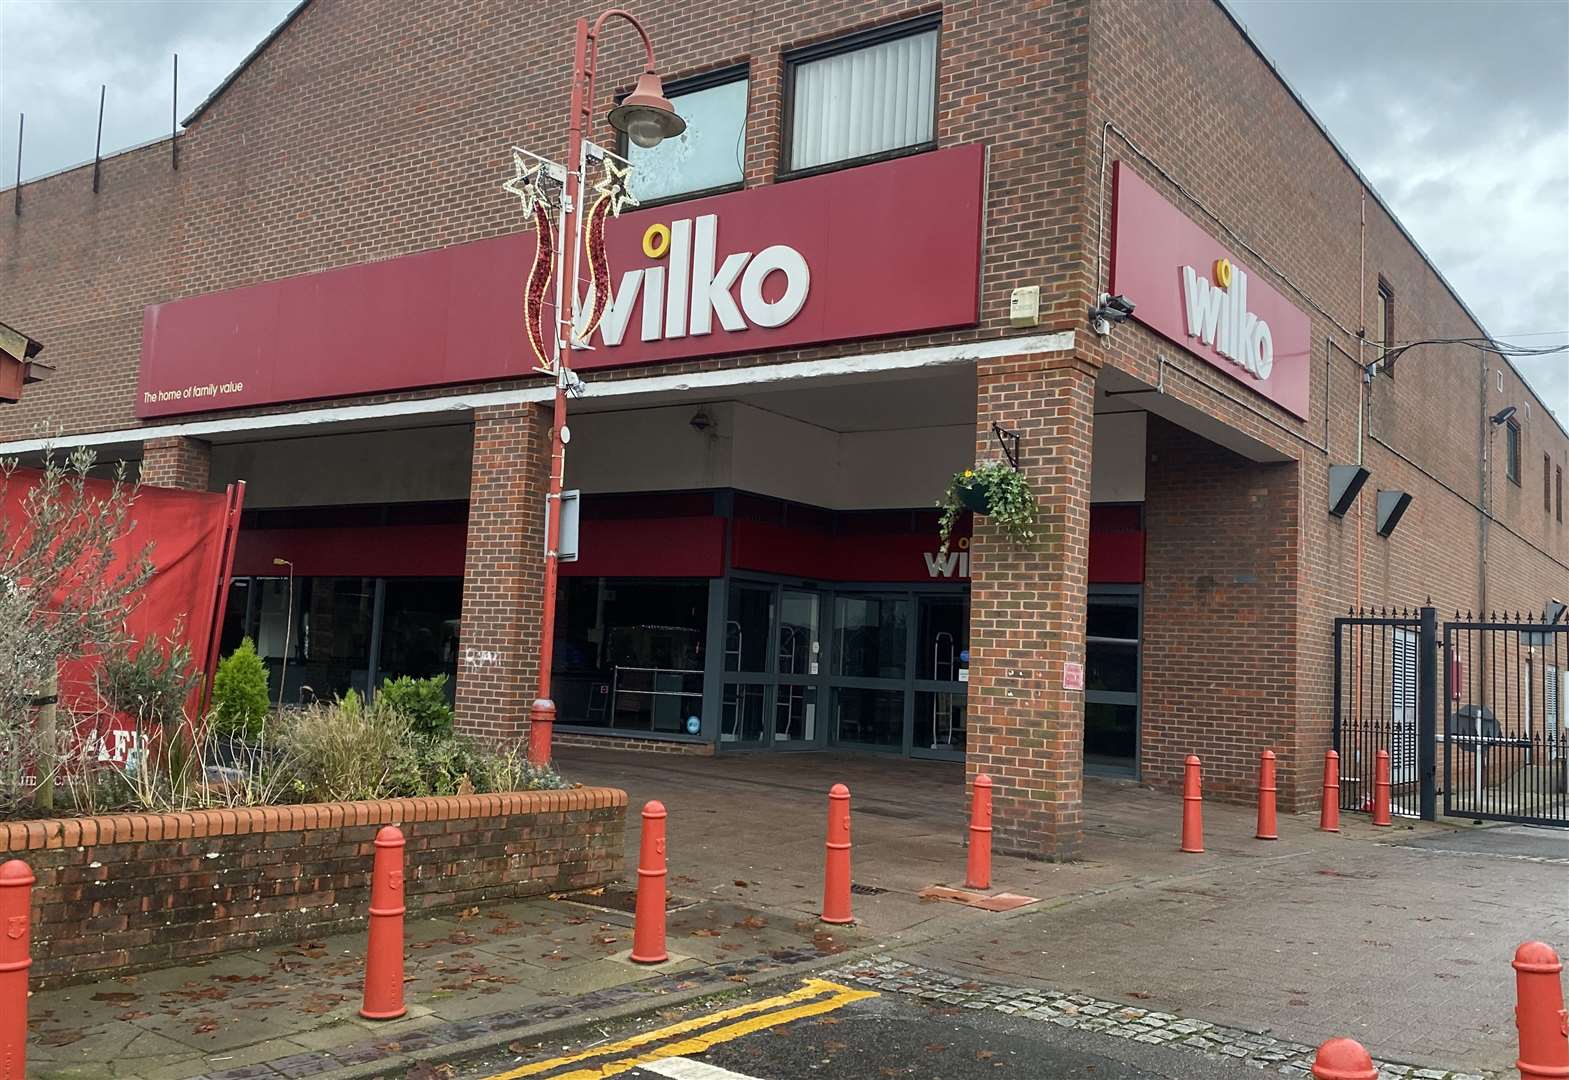 The budget retailer is opening inside the former Wilko store